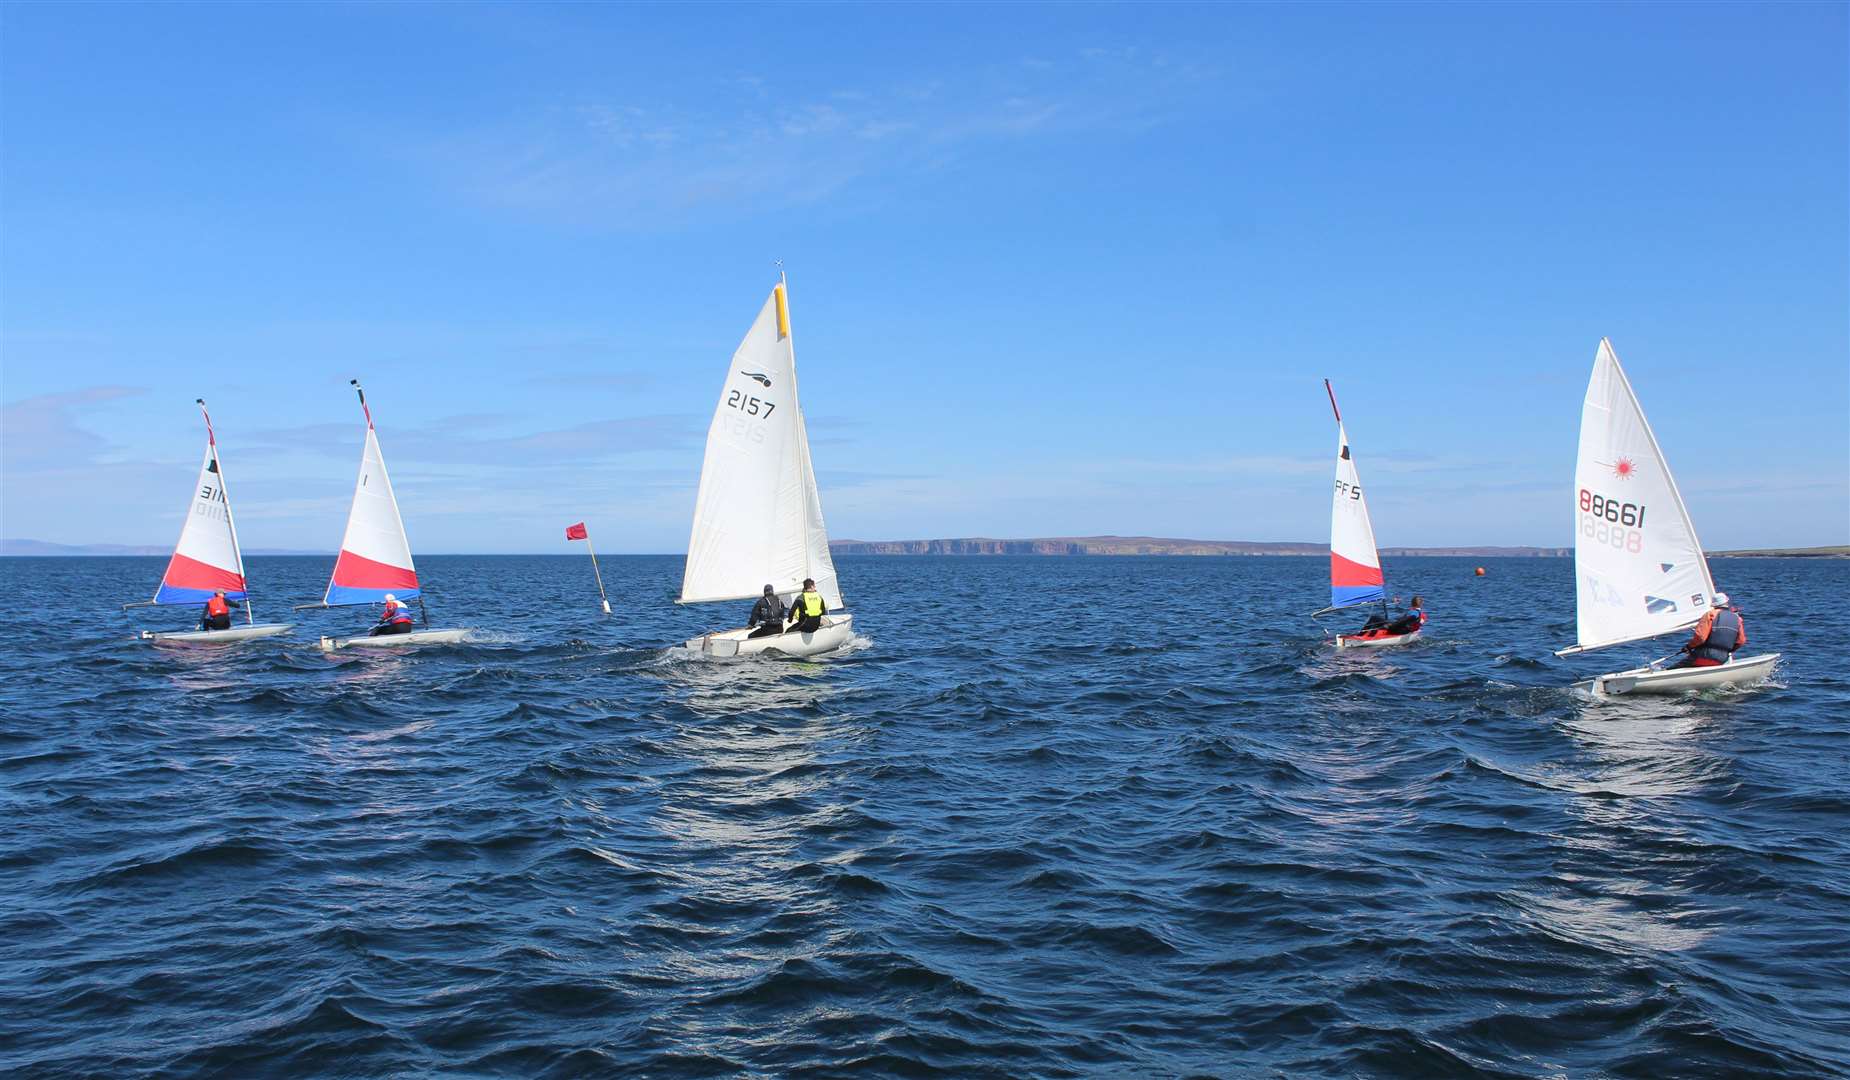 Sailors taking part in one of Pentland Firth Yacht Club's races on May 8.